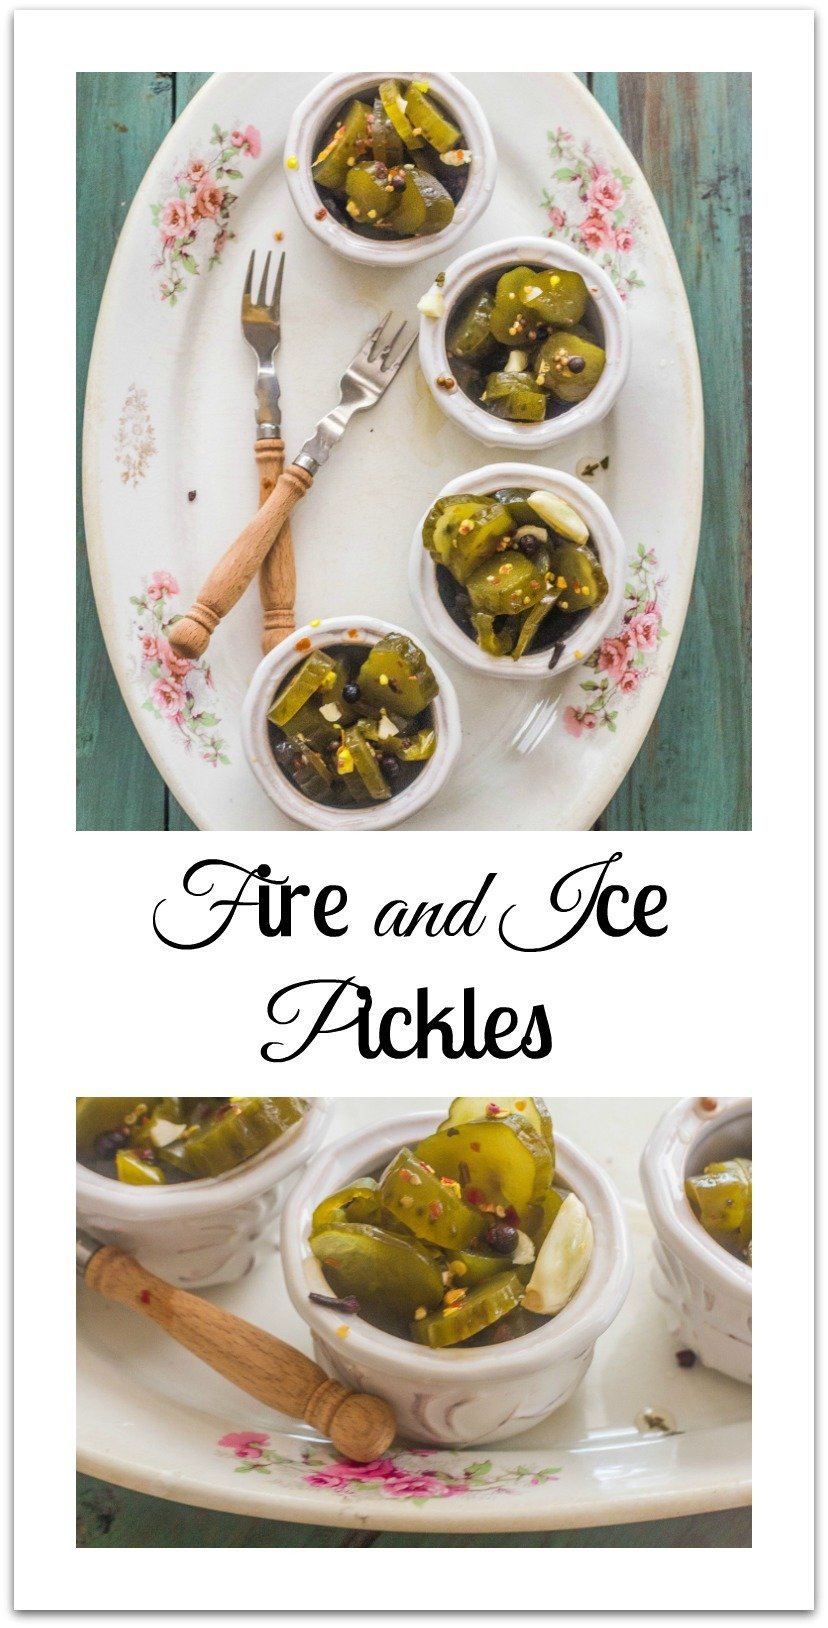 Fire and Ice Pickles is an  interesting recipe that transforms store bought dill pickles into a sweet, sour, and spicy pickle delight and doesn't require a canning process. #FireAndIce #Pickles